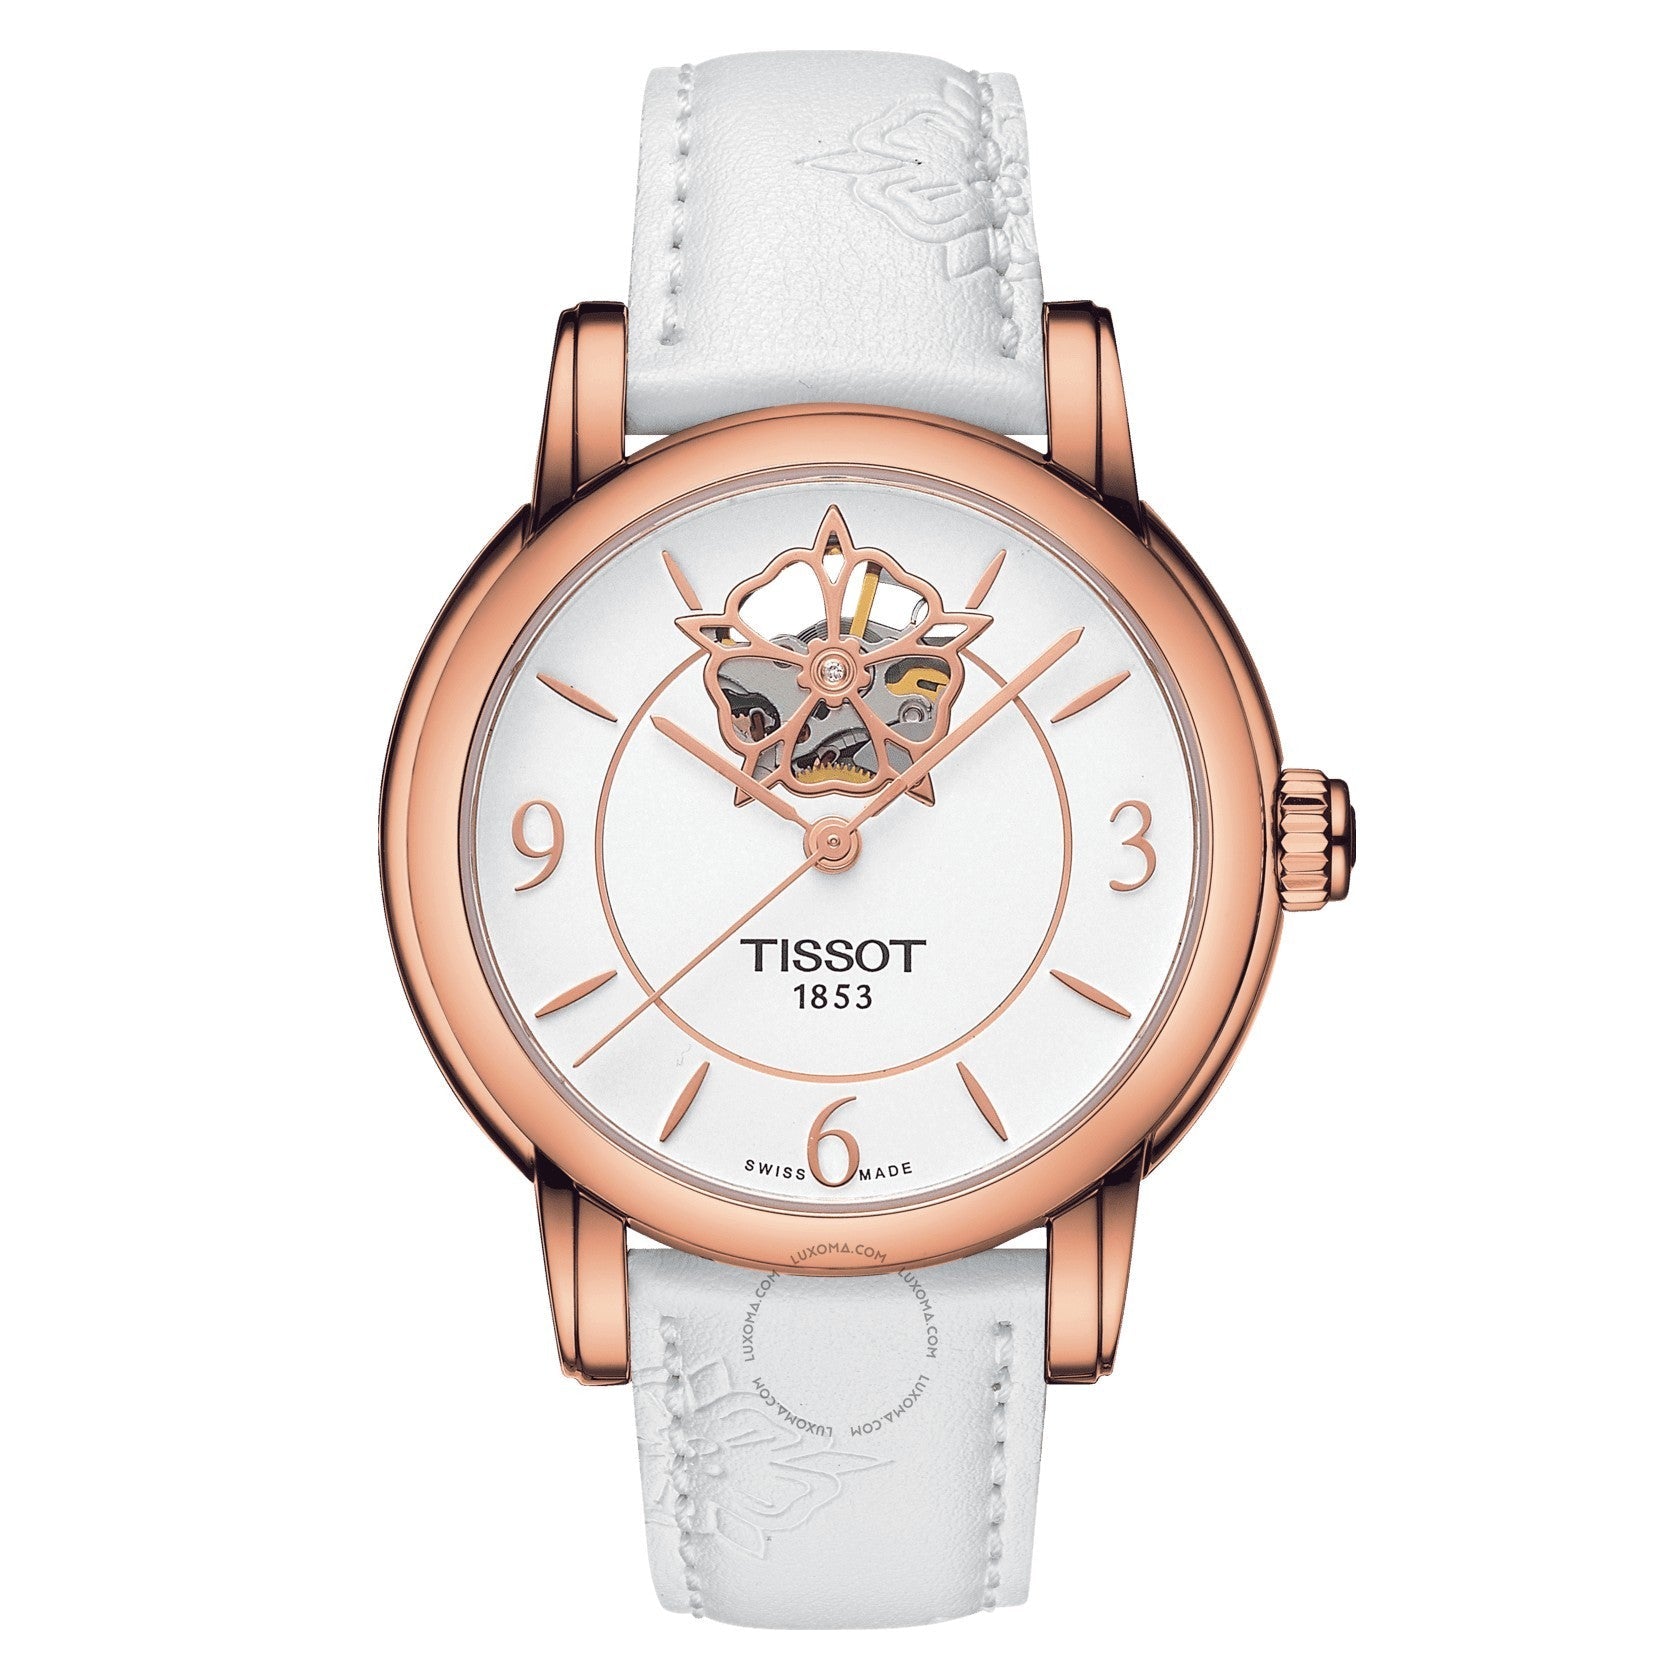 Tissot Lady Heart Automatic White Mother of Pearl (Open Heart) Dial Ladies Watch T050.207.37.017.04